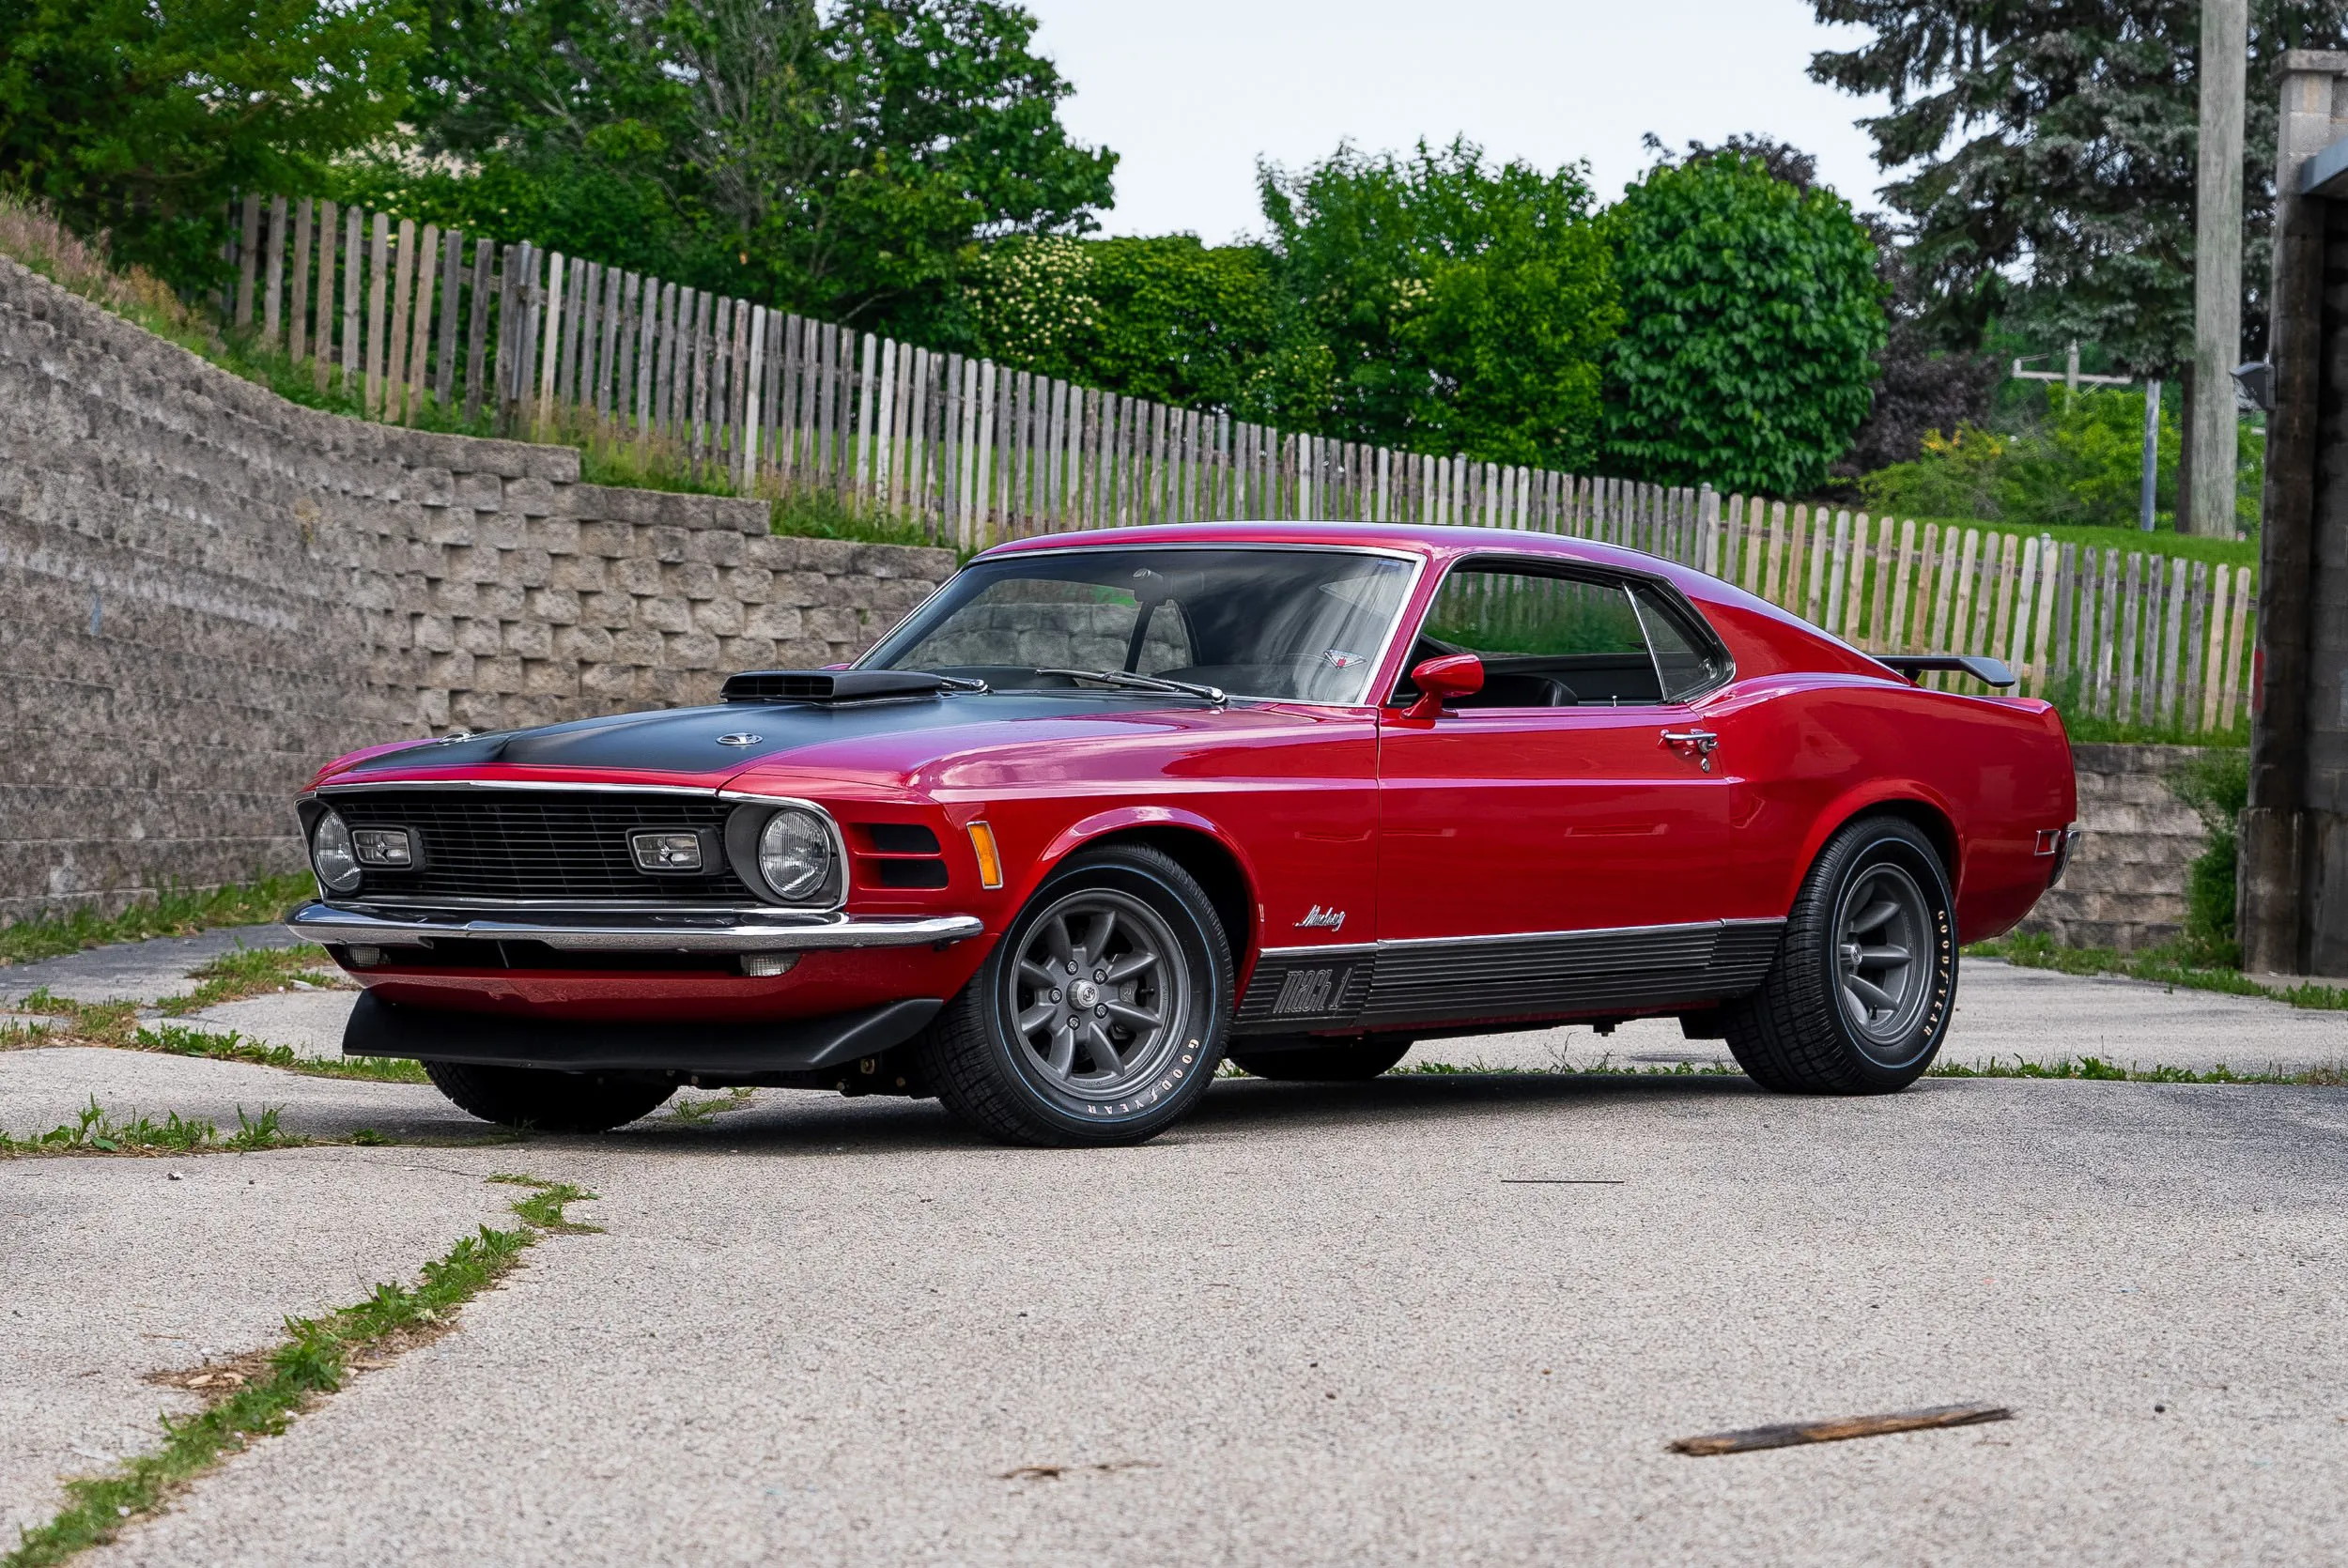 LS7 Swapped 1970 Mustang Mach 1 Makes Old and New Designs Work as One ...